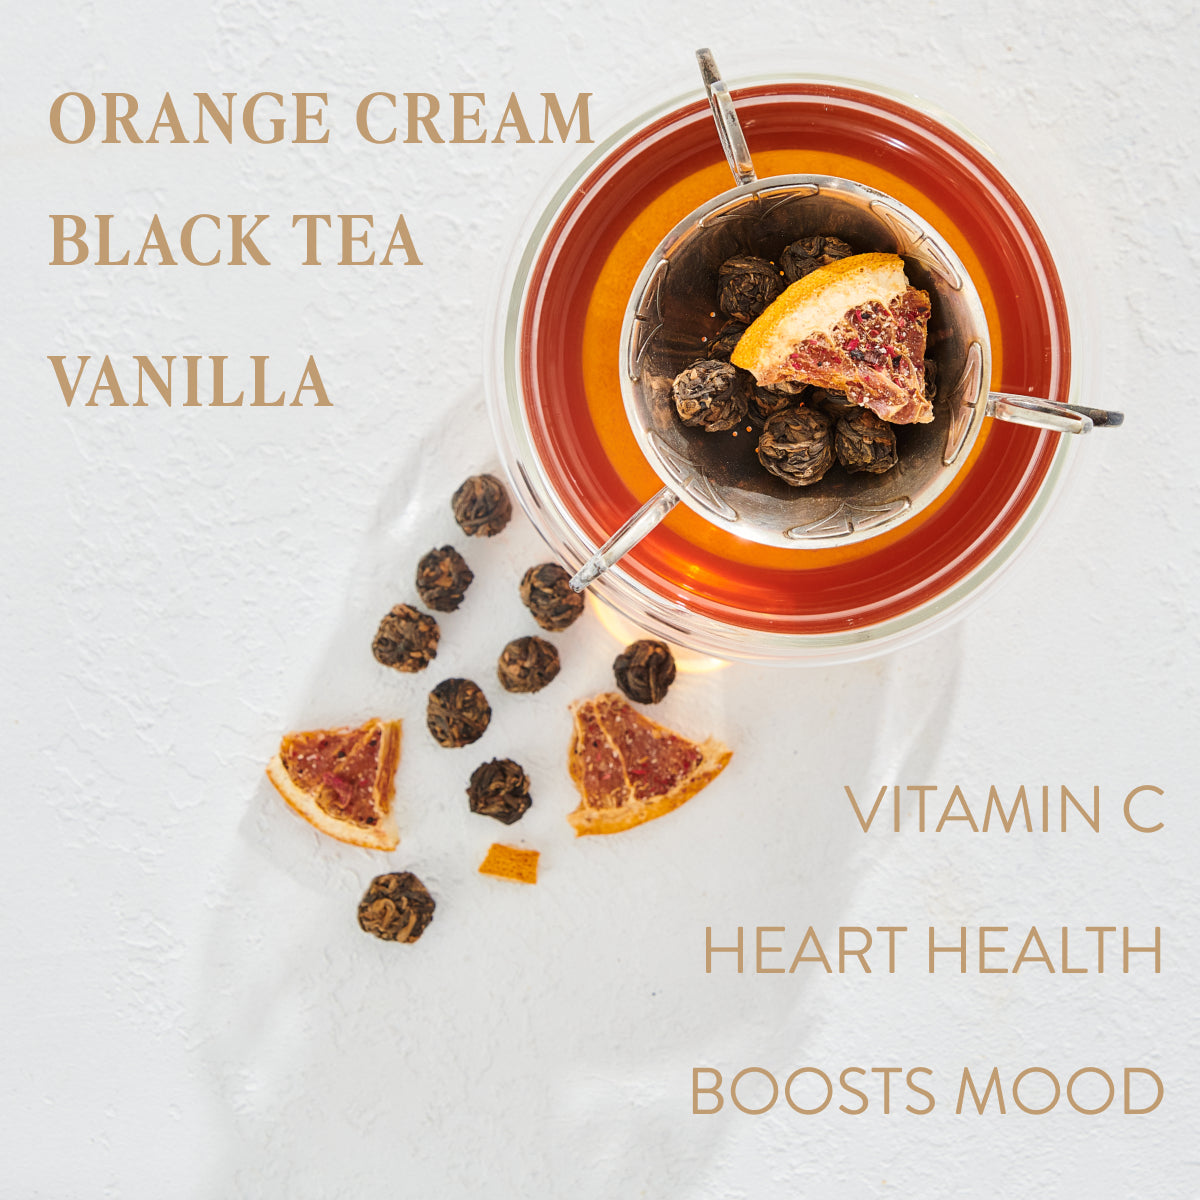 A glass of tea with an infuser containing a dried orange slice and tea balls. Surrounding the glass are additional tea balls and orange slices. Text on image reads: "ORANGE CREAM, BLACK TEA, VANILLA" and "VITAMIN C, HEART HEALTH, BOOSTS MOOD." Experience the magic of Leo: Queen of Courage Tea of the Sun by Magic Hour.